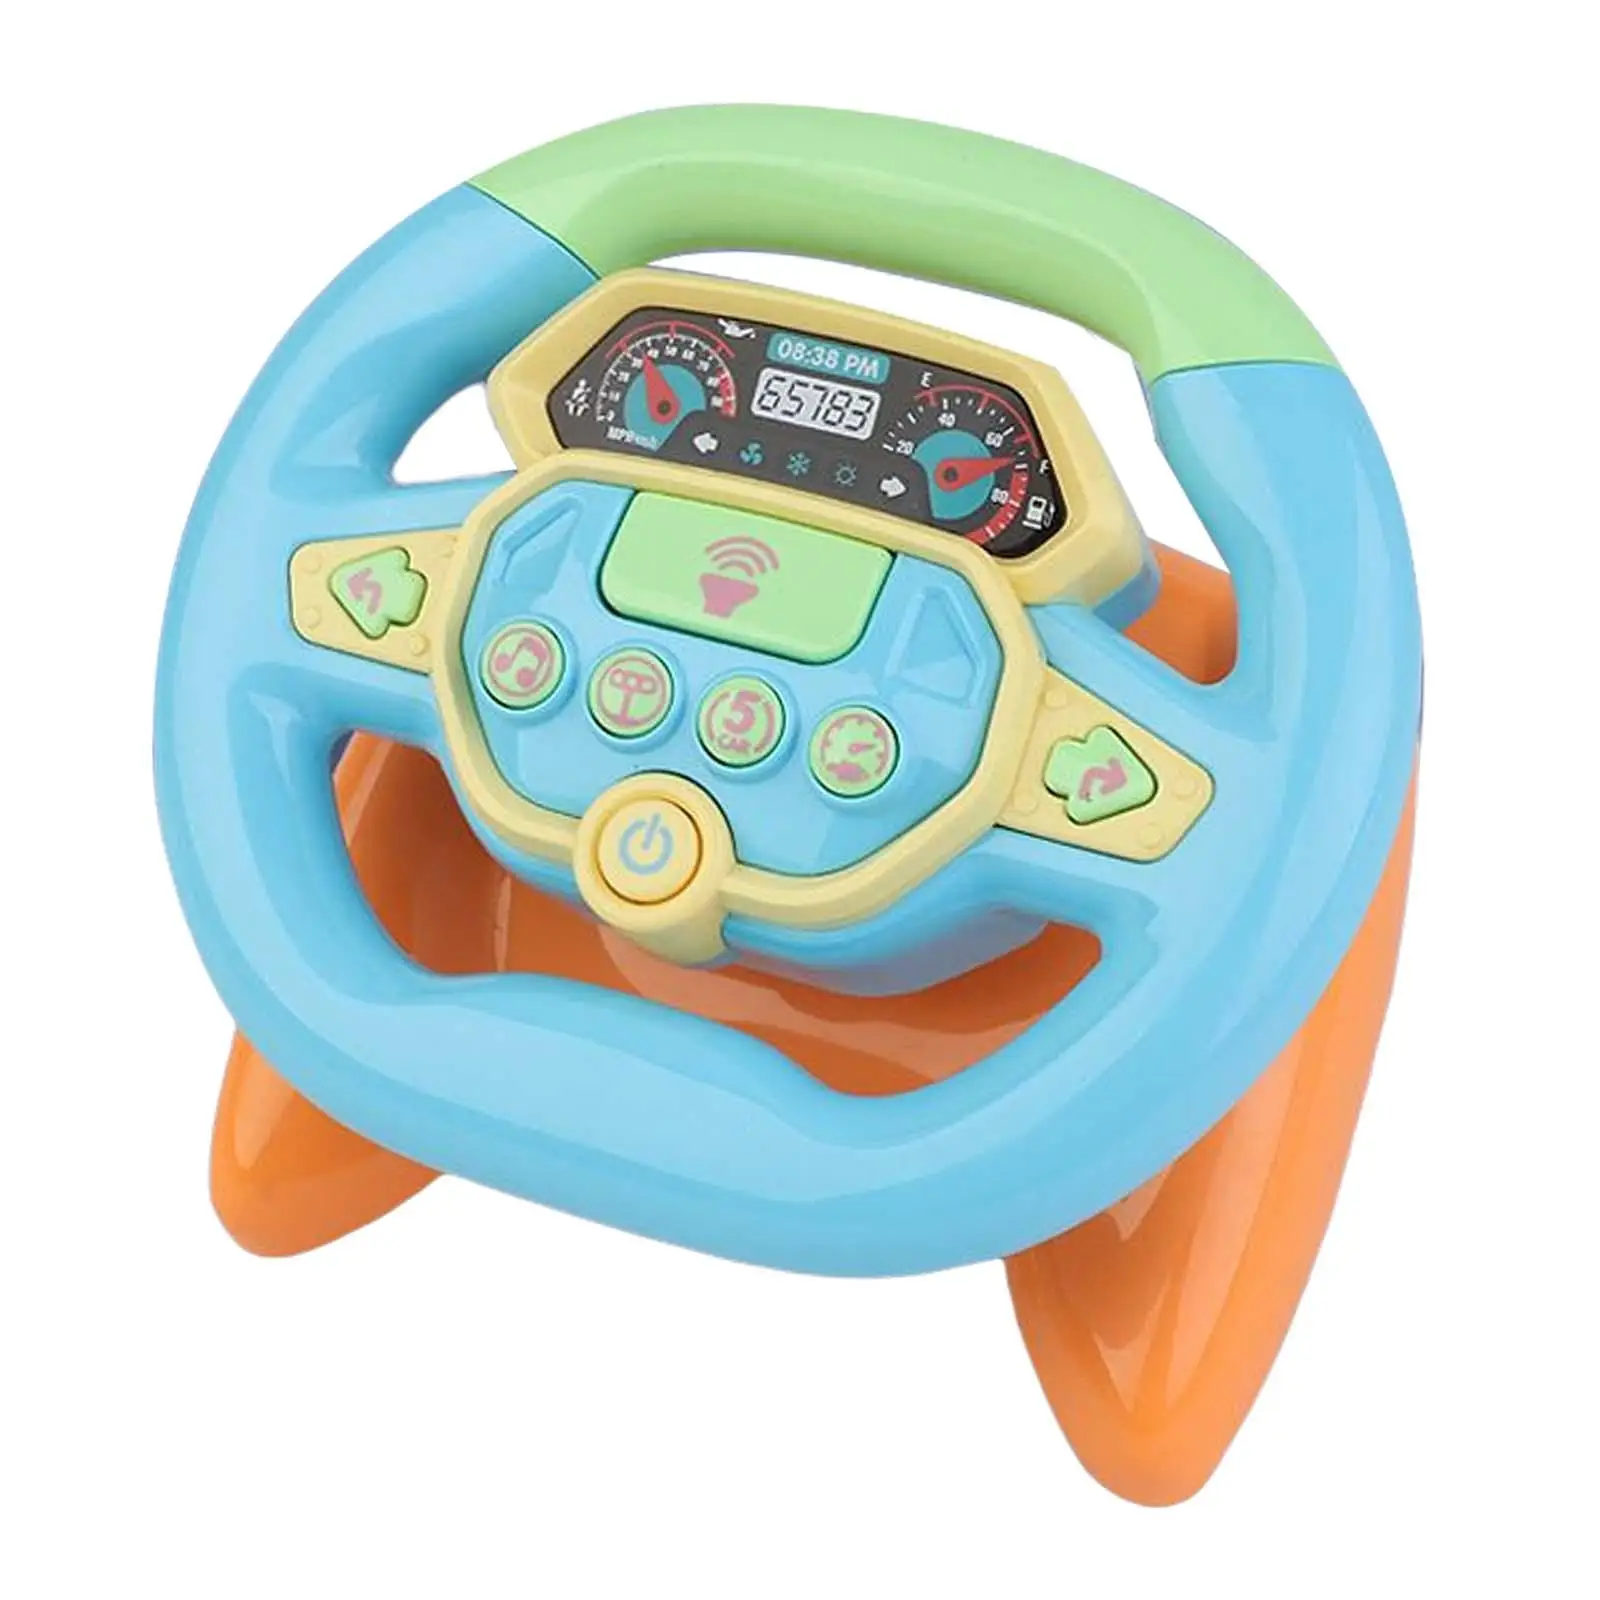 Rotating Simulated Driving Steering Wheel Toy Educational Learning Toy Pretend Play Entertainment Interactive Birthday Gifts